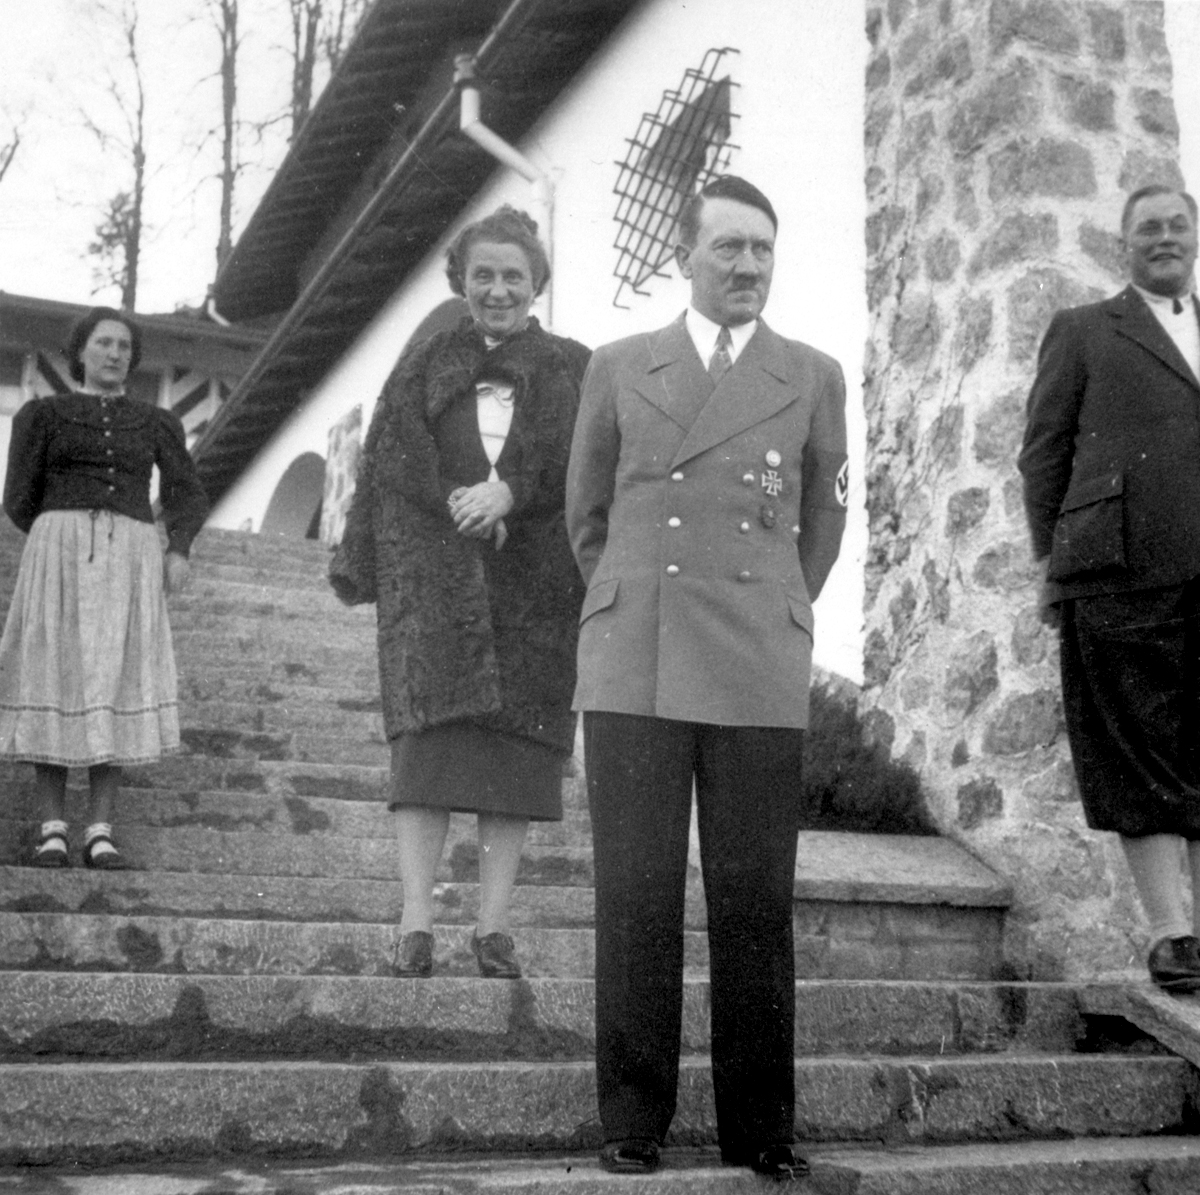 Adolf Hitler on the stairs of the Berghof before Franz Xaver Schwarz and his wife's visit for Scharz's birthday, from Eva Braun's albums